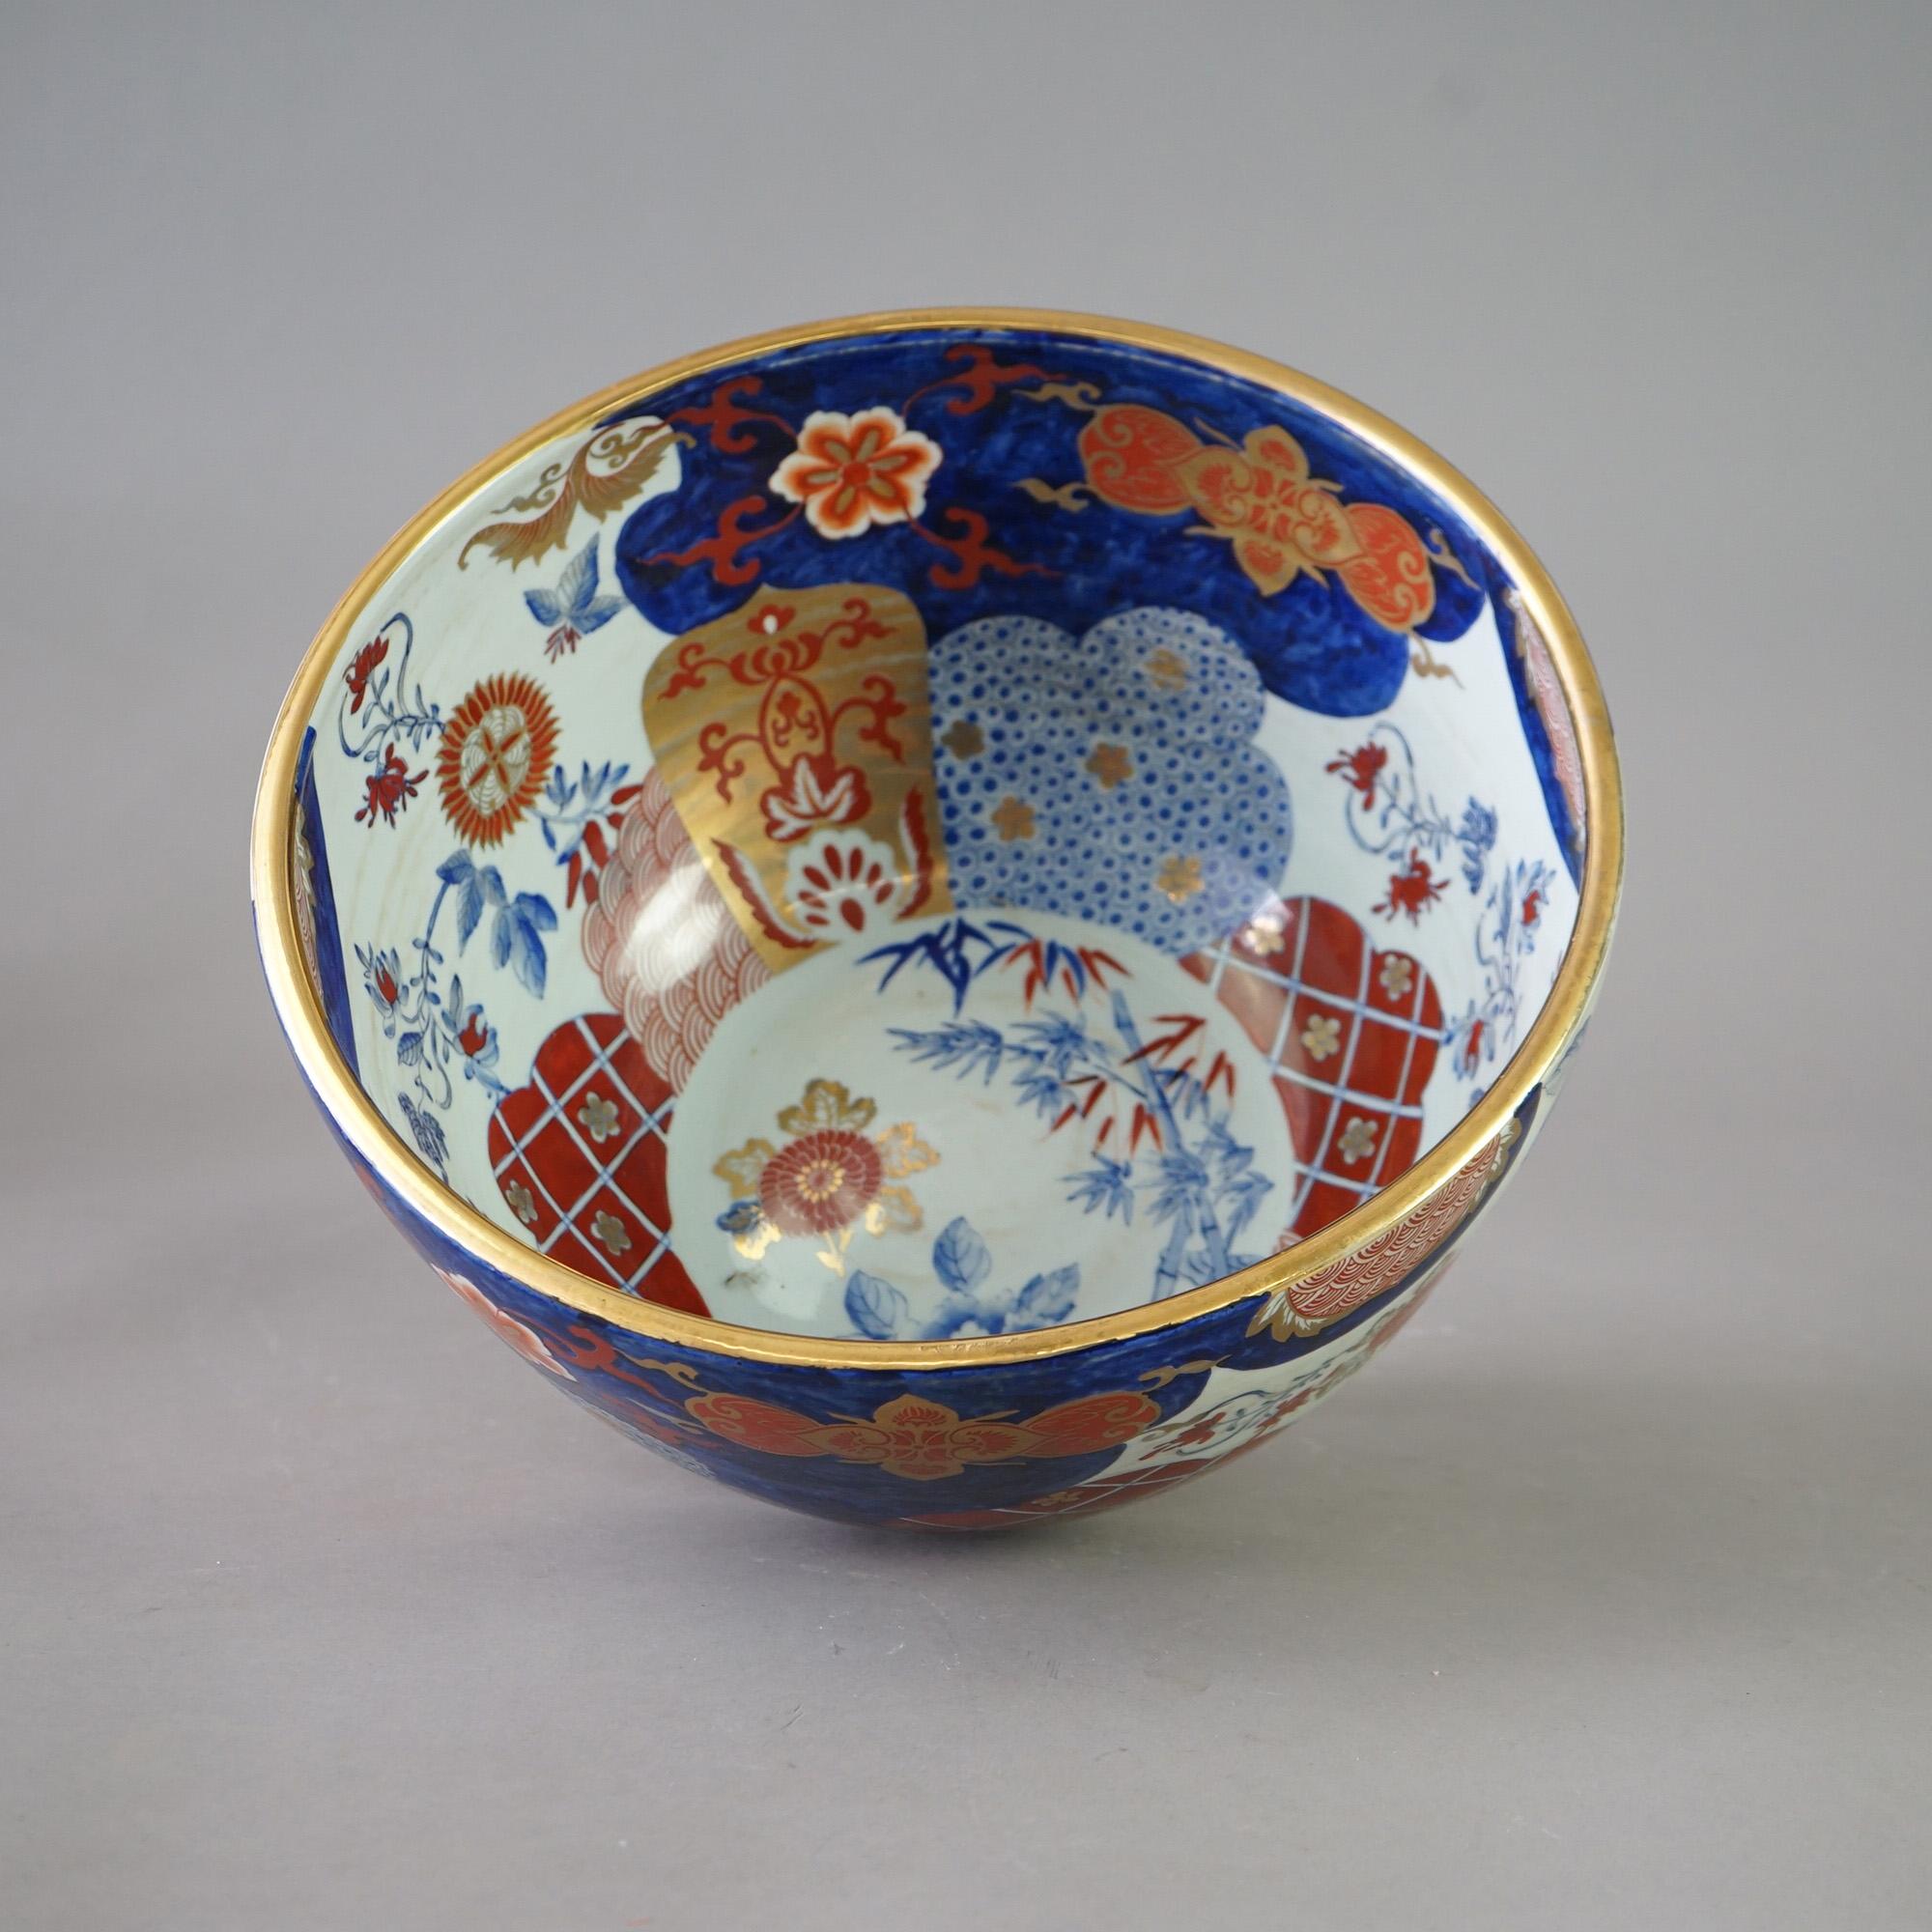 An antique Chinese Imari oversized center bowl offers porcelain construction with hand painted garden elements and gilt highlights throughout, c1920

Measures - 7.75